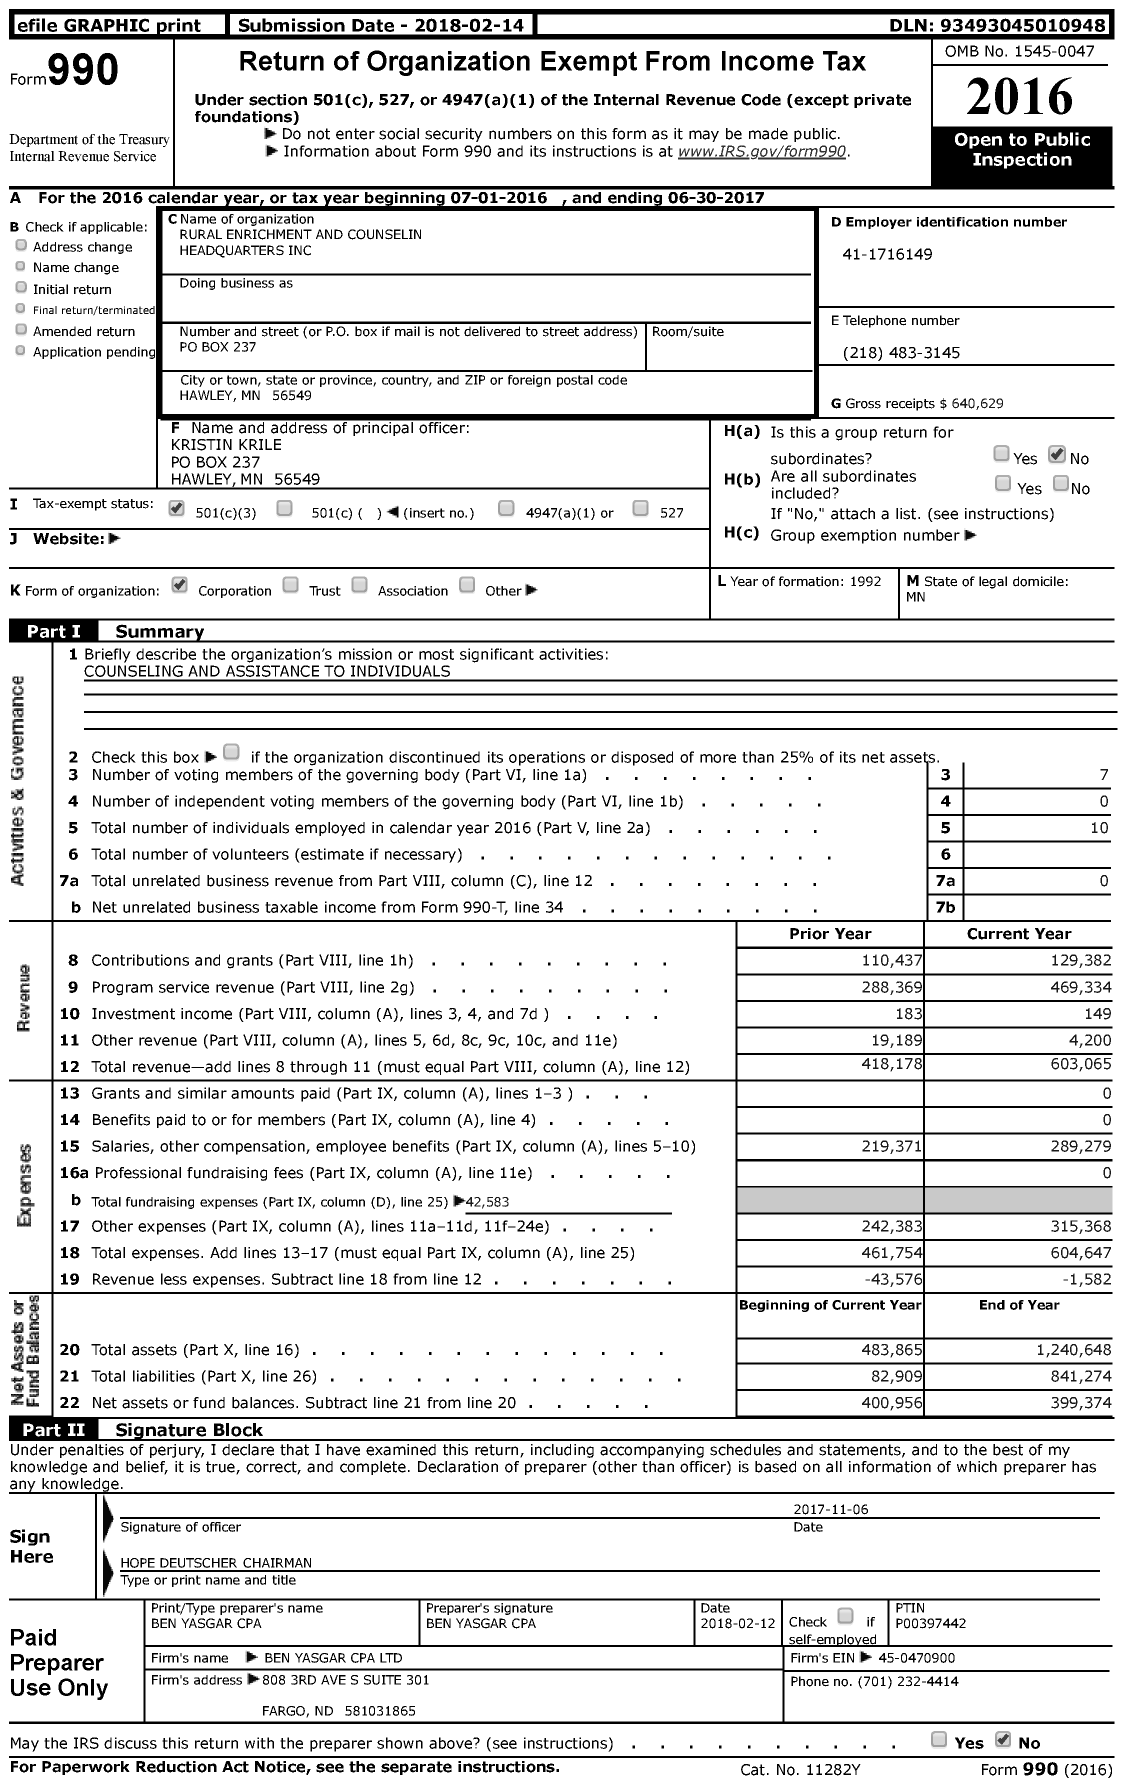 Image of first page of 2016 Form 990 for Reach / Rural Enrichment and Counseling